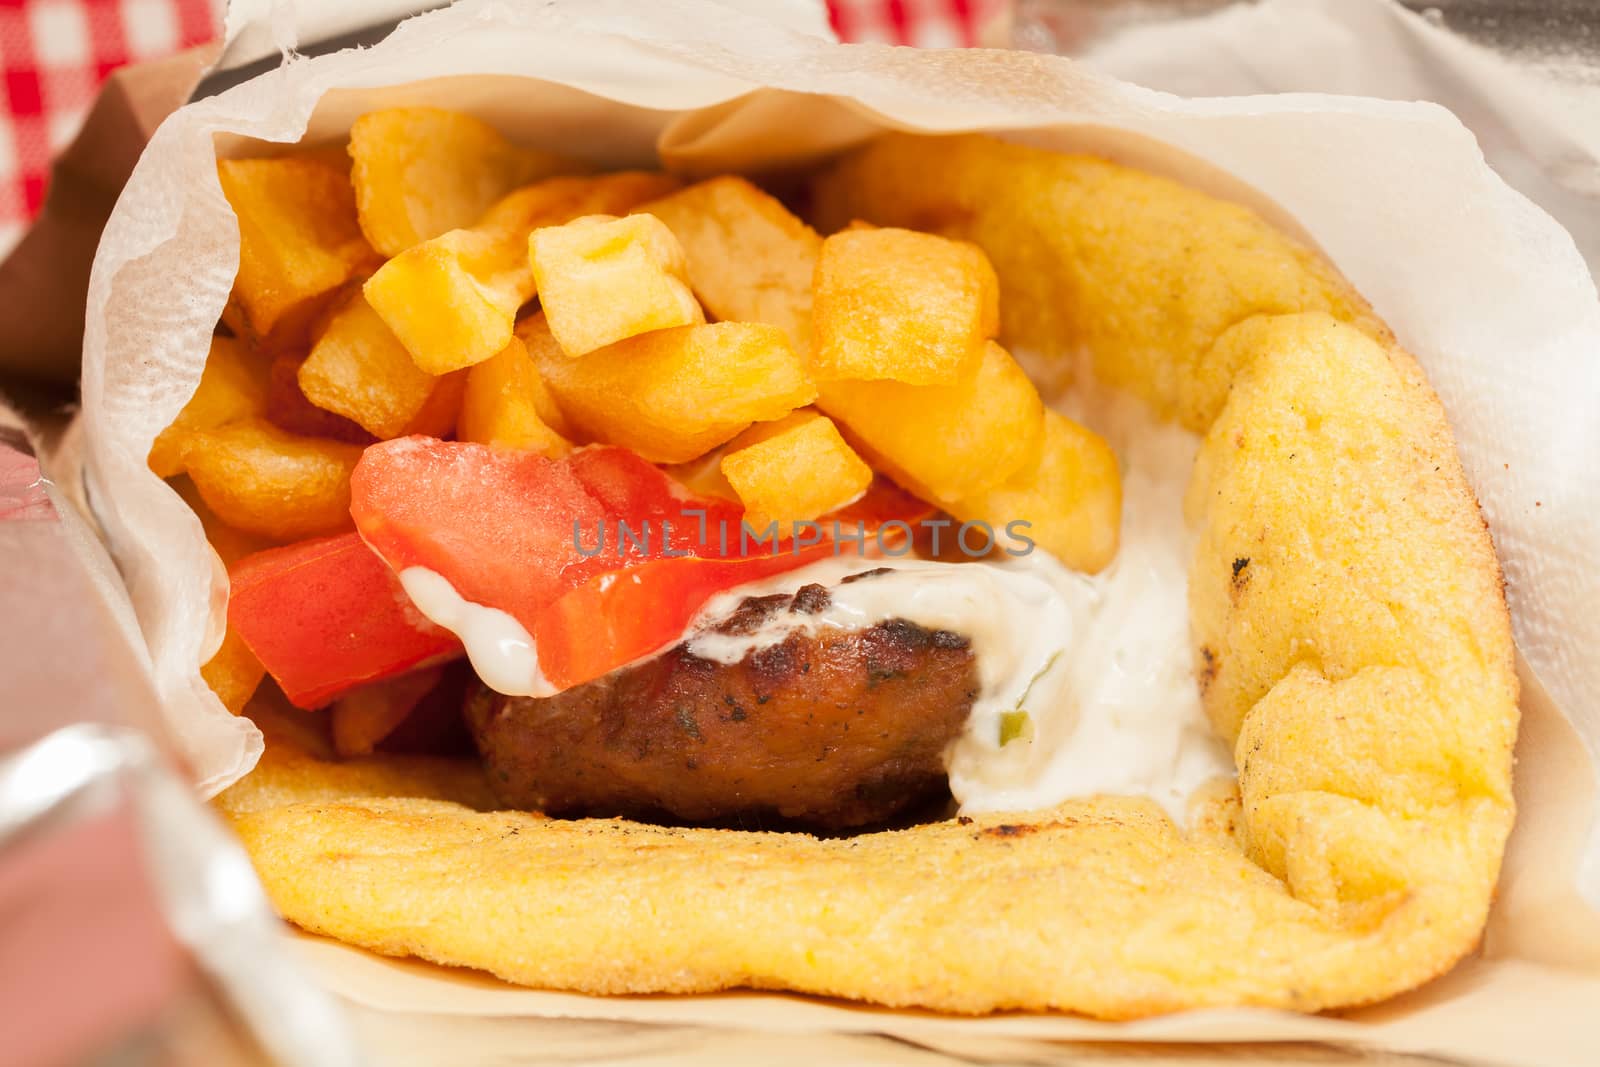 View of a Greek traditional soutzoukaki wrapped with pitta from corn, which contains fried fries, yoghurt, onion and tomato